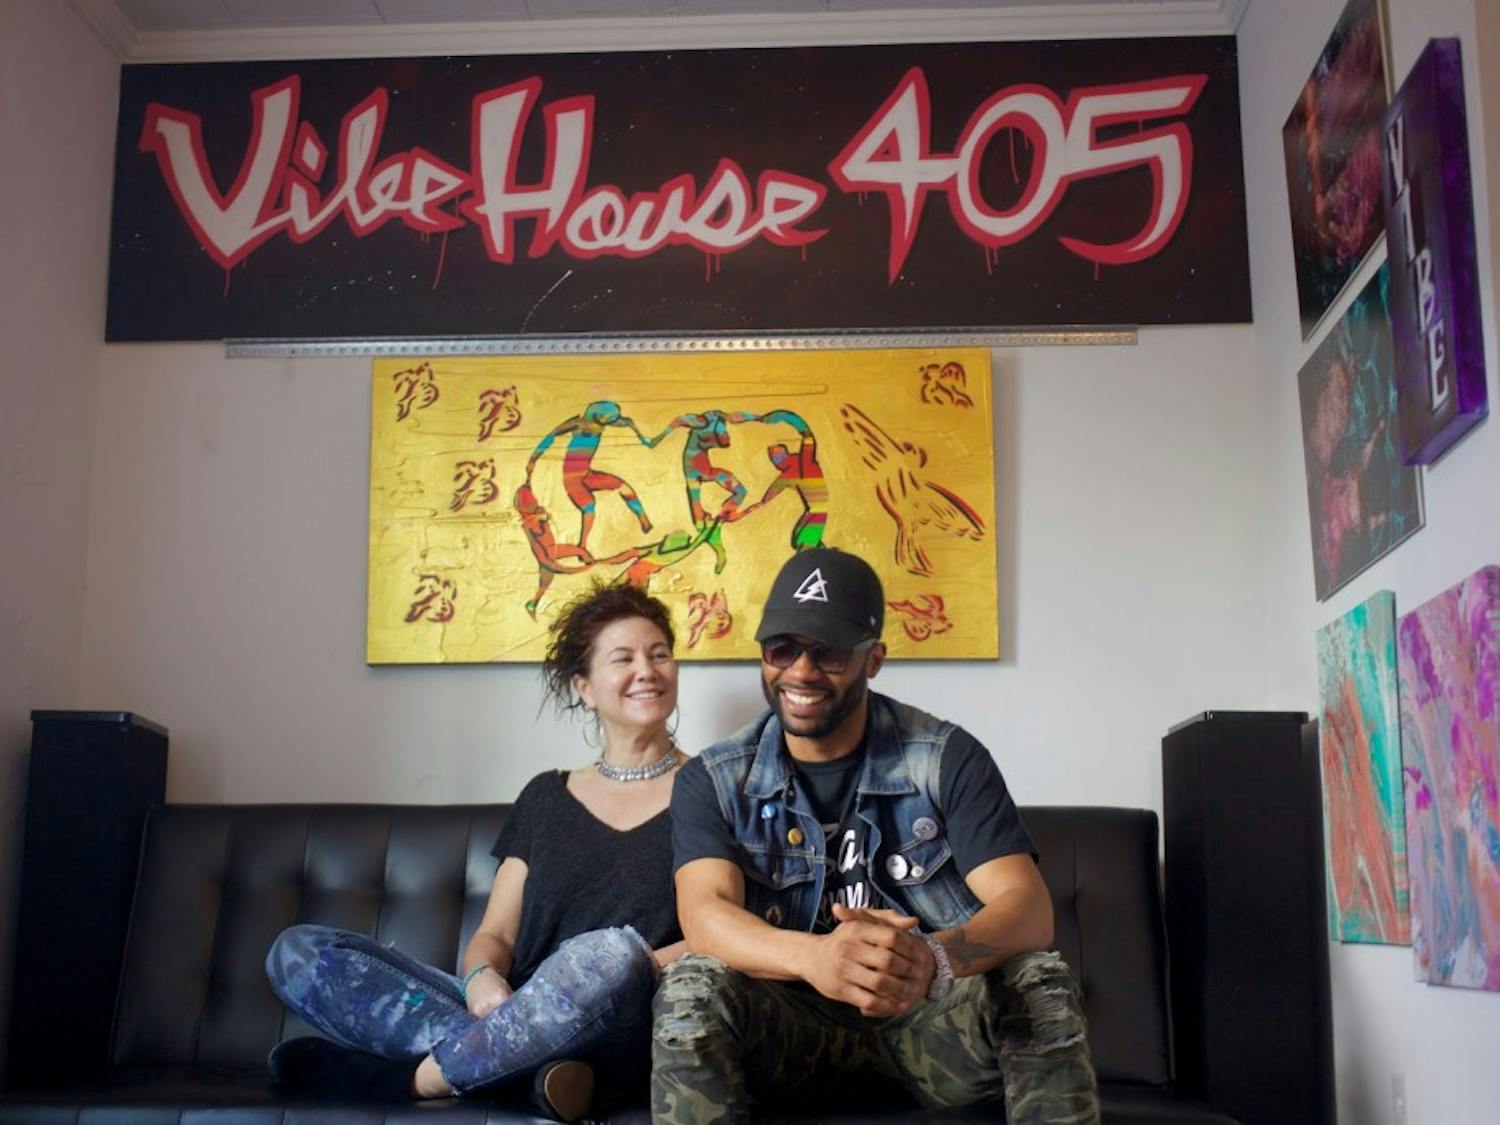 Co-owners Wendy Mann and Kevin "Kaze" Thomas sit in the gallery space at VibeHouse 405.